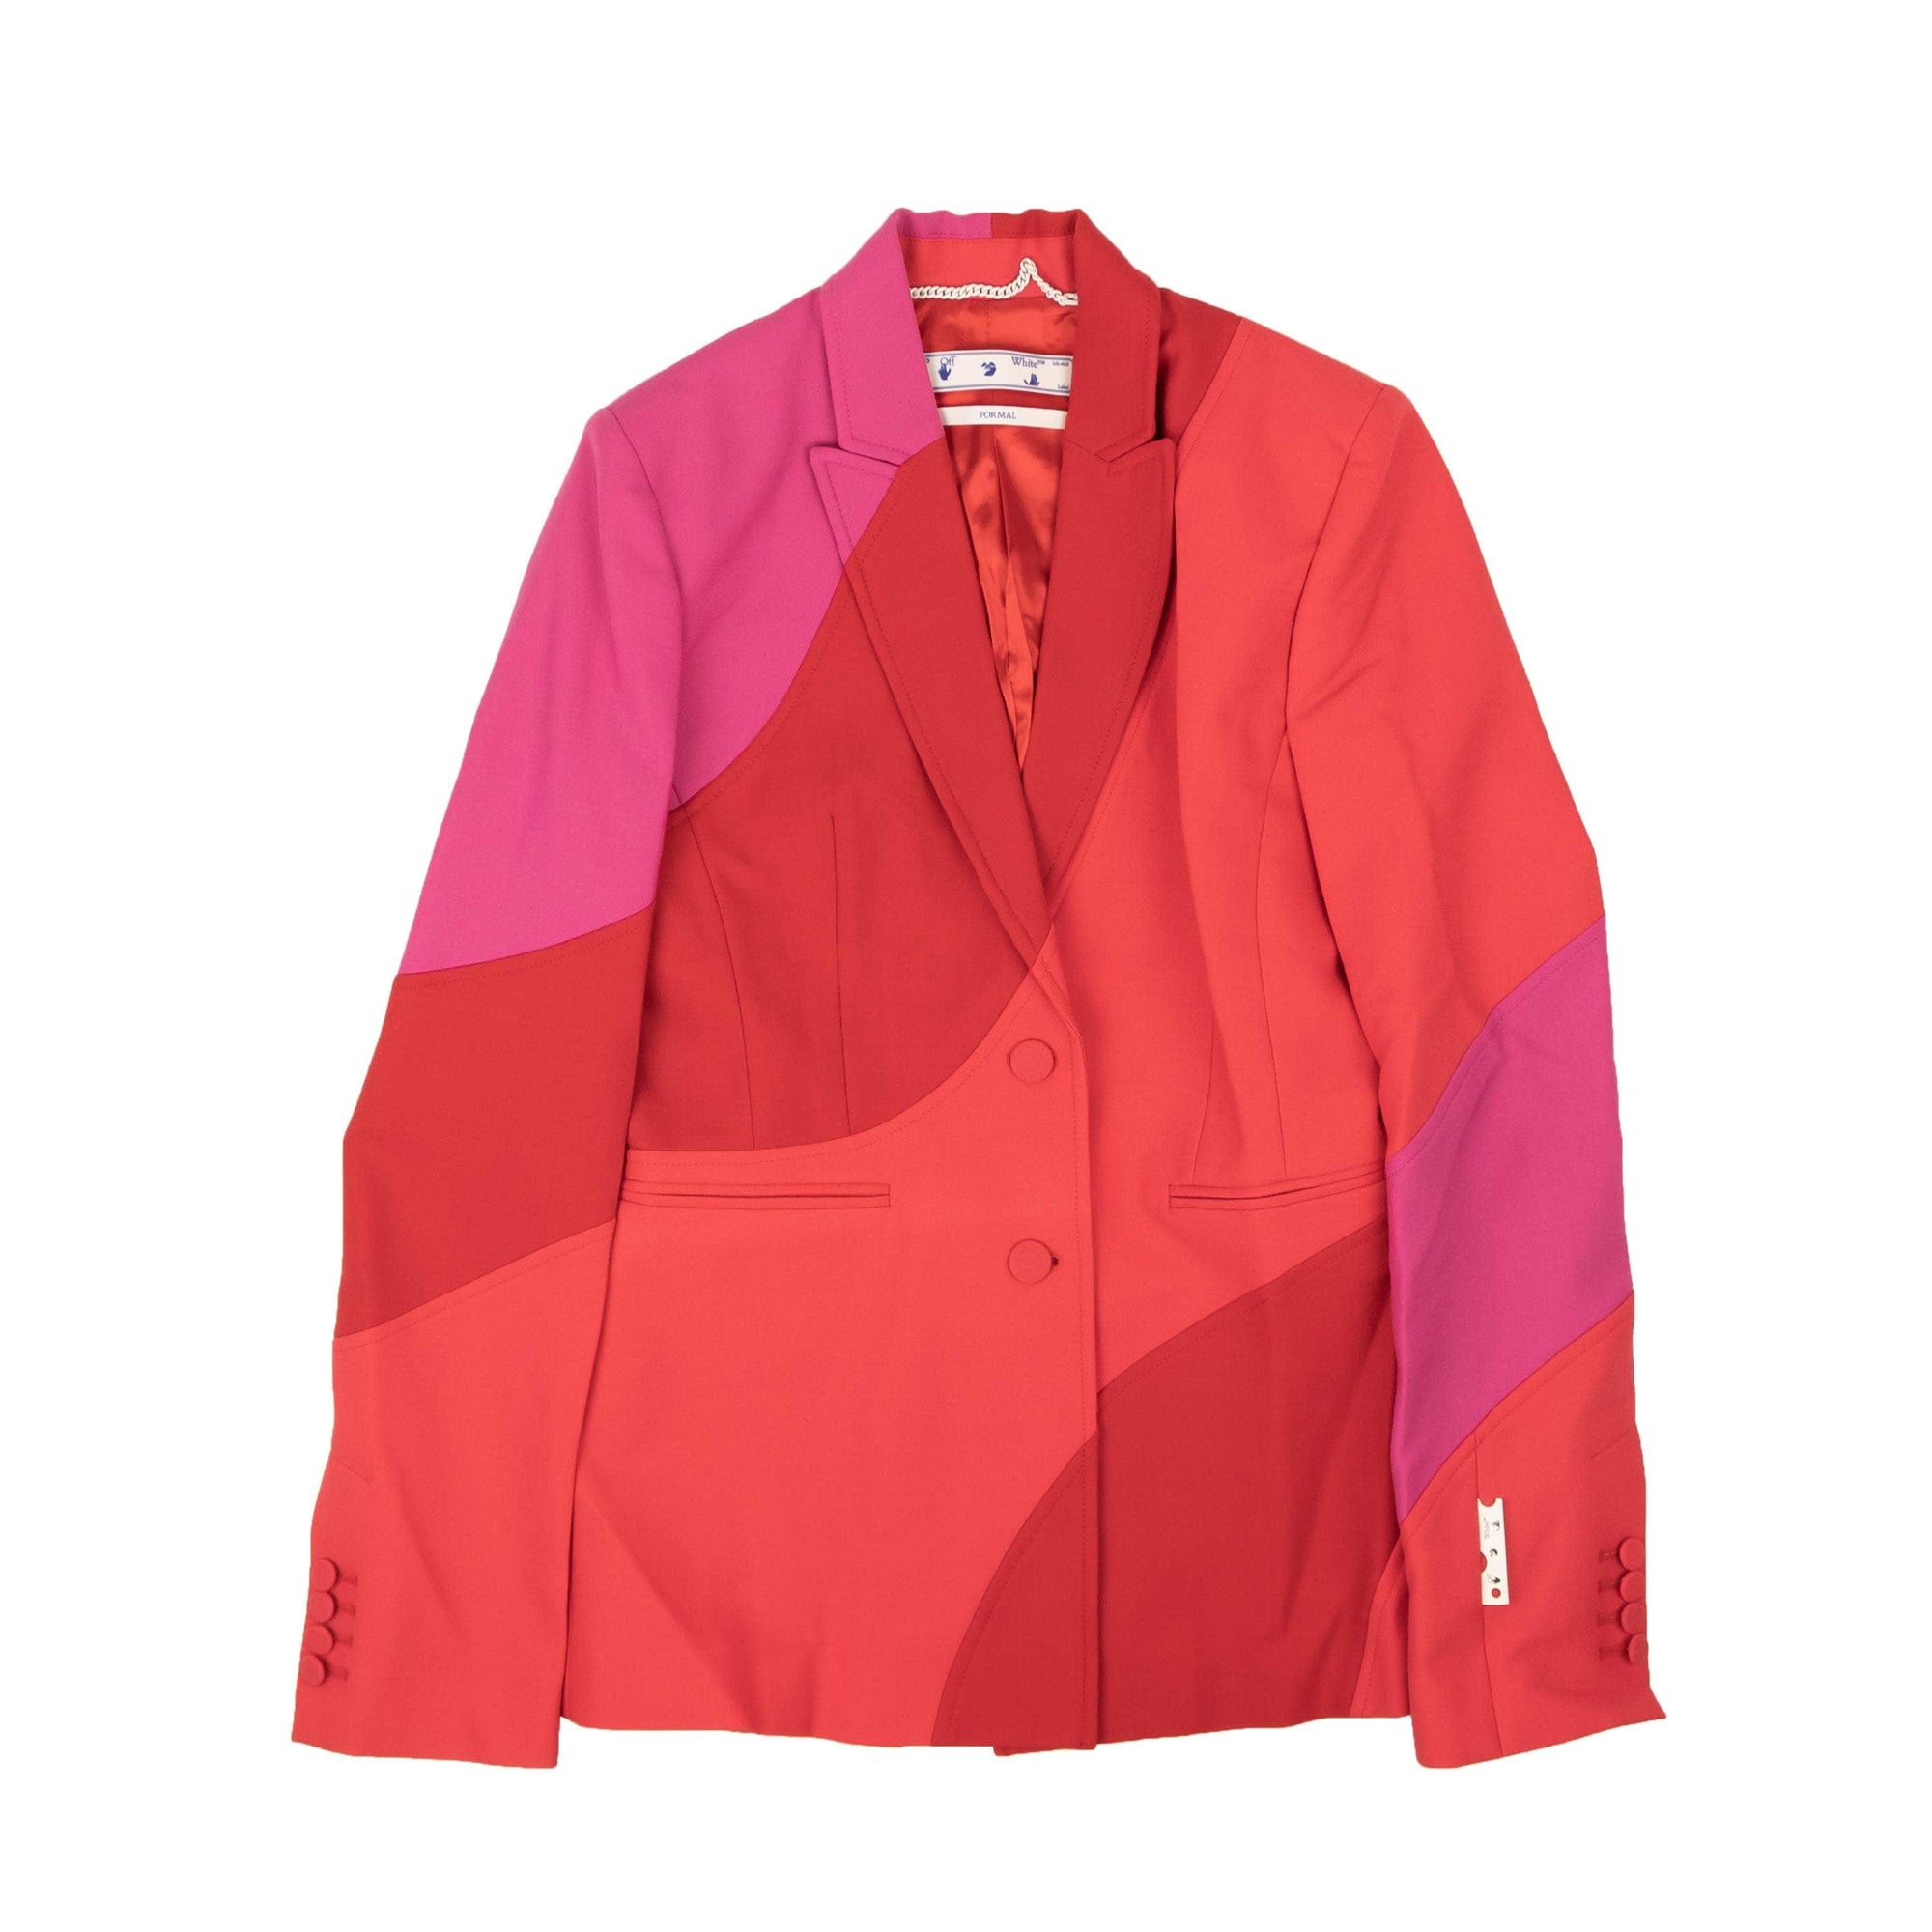 Off-White c/o Virgil Abloh 500-750, channelenable-all, chicmi, couponcollection, gender-womens, main-clothing, off-white-c-o-virgil-abloh, oww1, size-38, size-40, SPO, womens-jackets-blazers Red And Pink Spiral Jacket